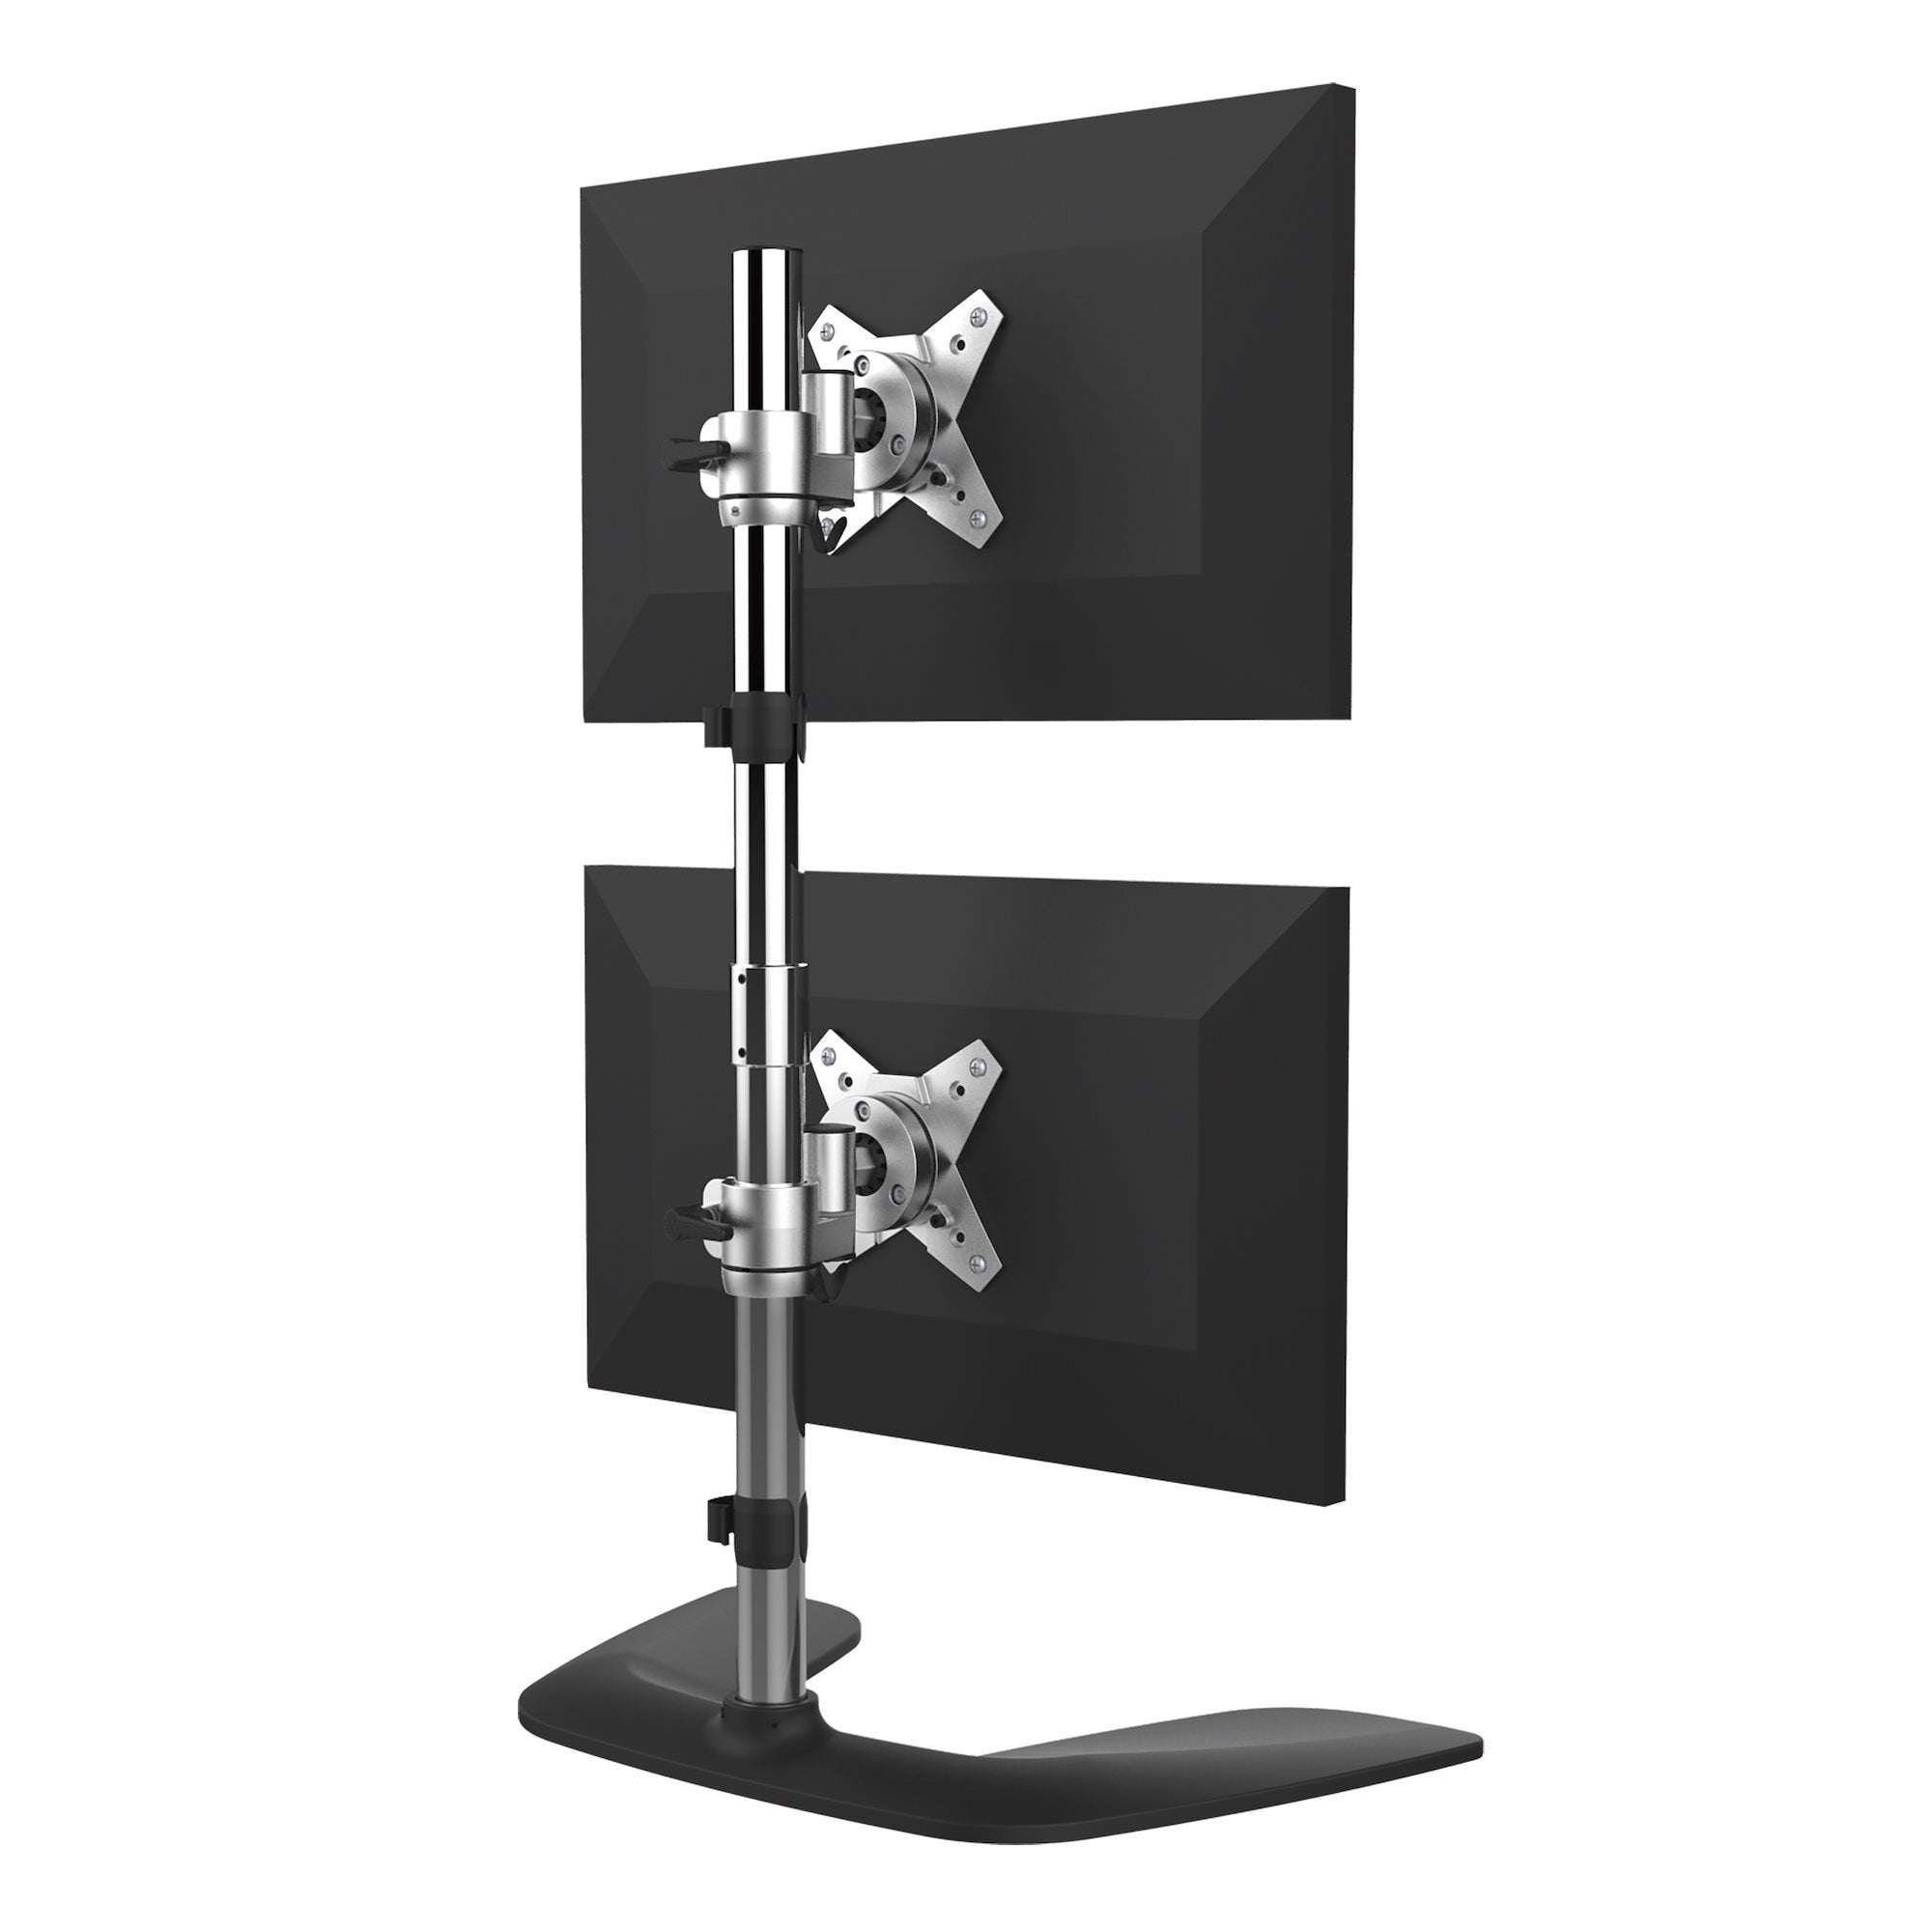 Startech Vertical Dual Monitor Stand - Ergonomic Desktop Stacked Two Monitor Stand up to 27 inch VESA Mount Displays, Free Standing Universal Monitor Mount, Height Adjustable Silver ARMDUOVS - IT Buy Singapore Powered by Win-Pro